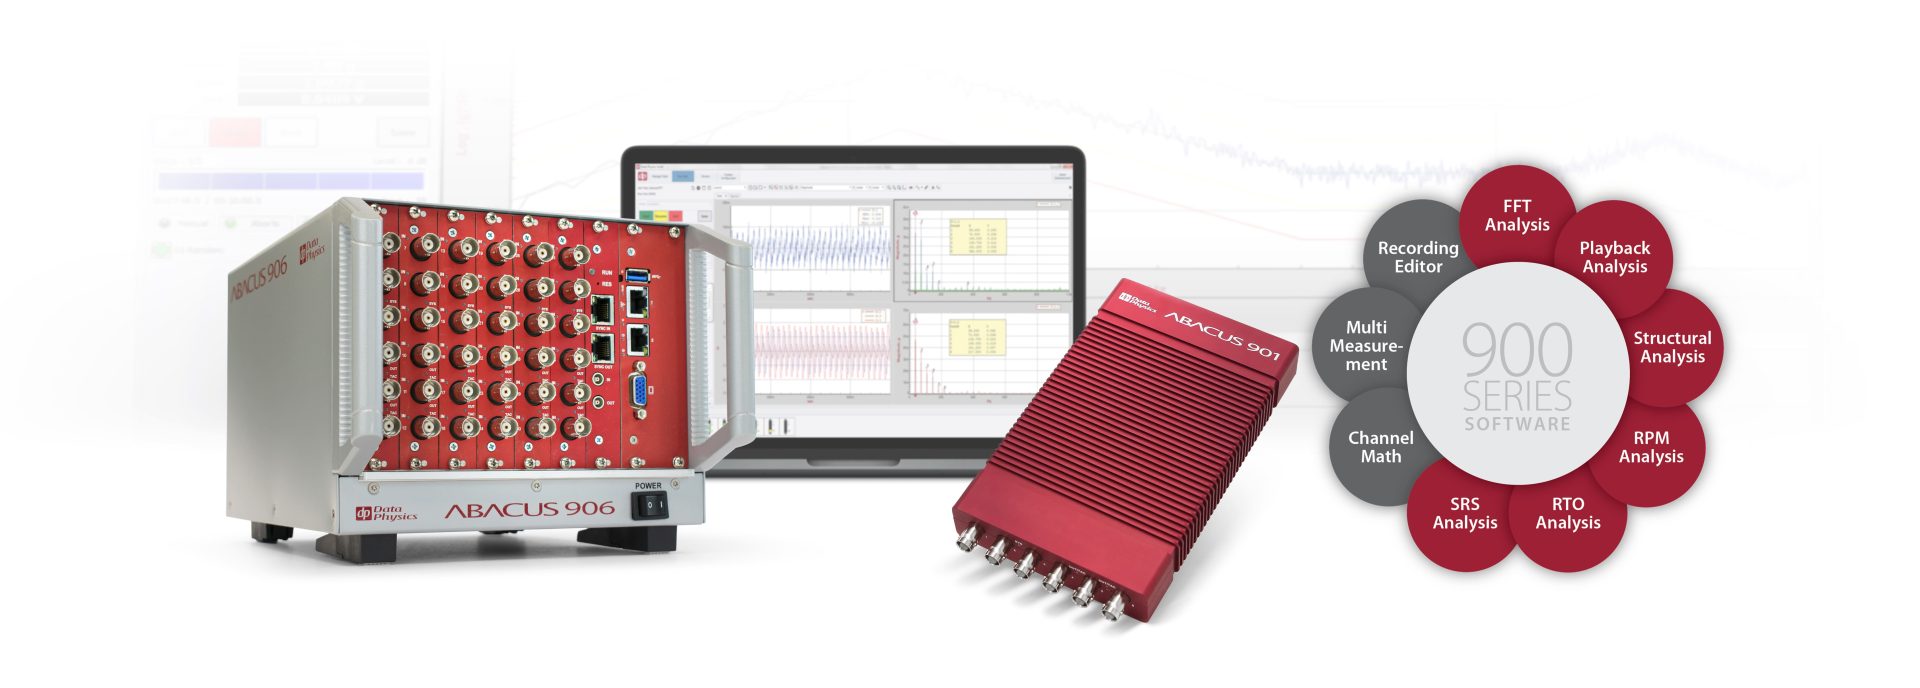 900 series signal analysis applications software